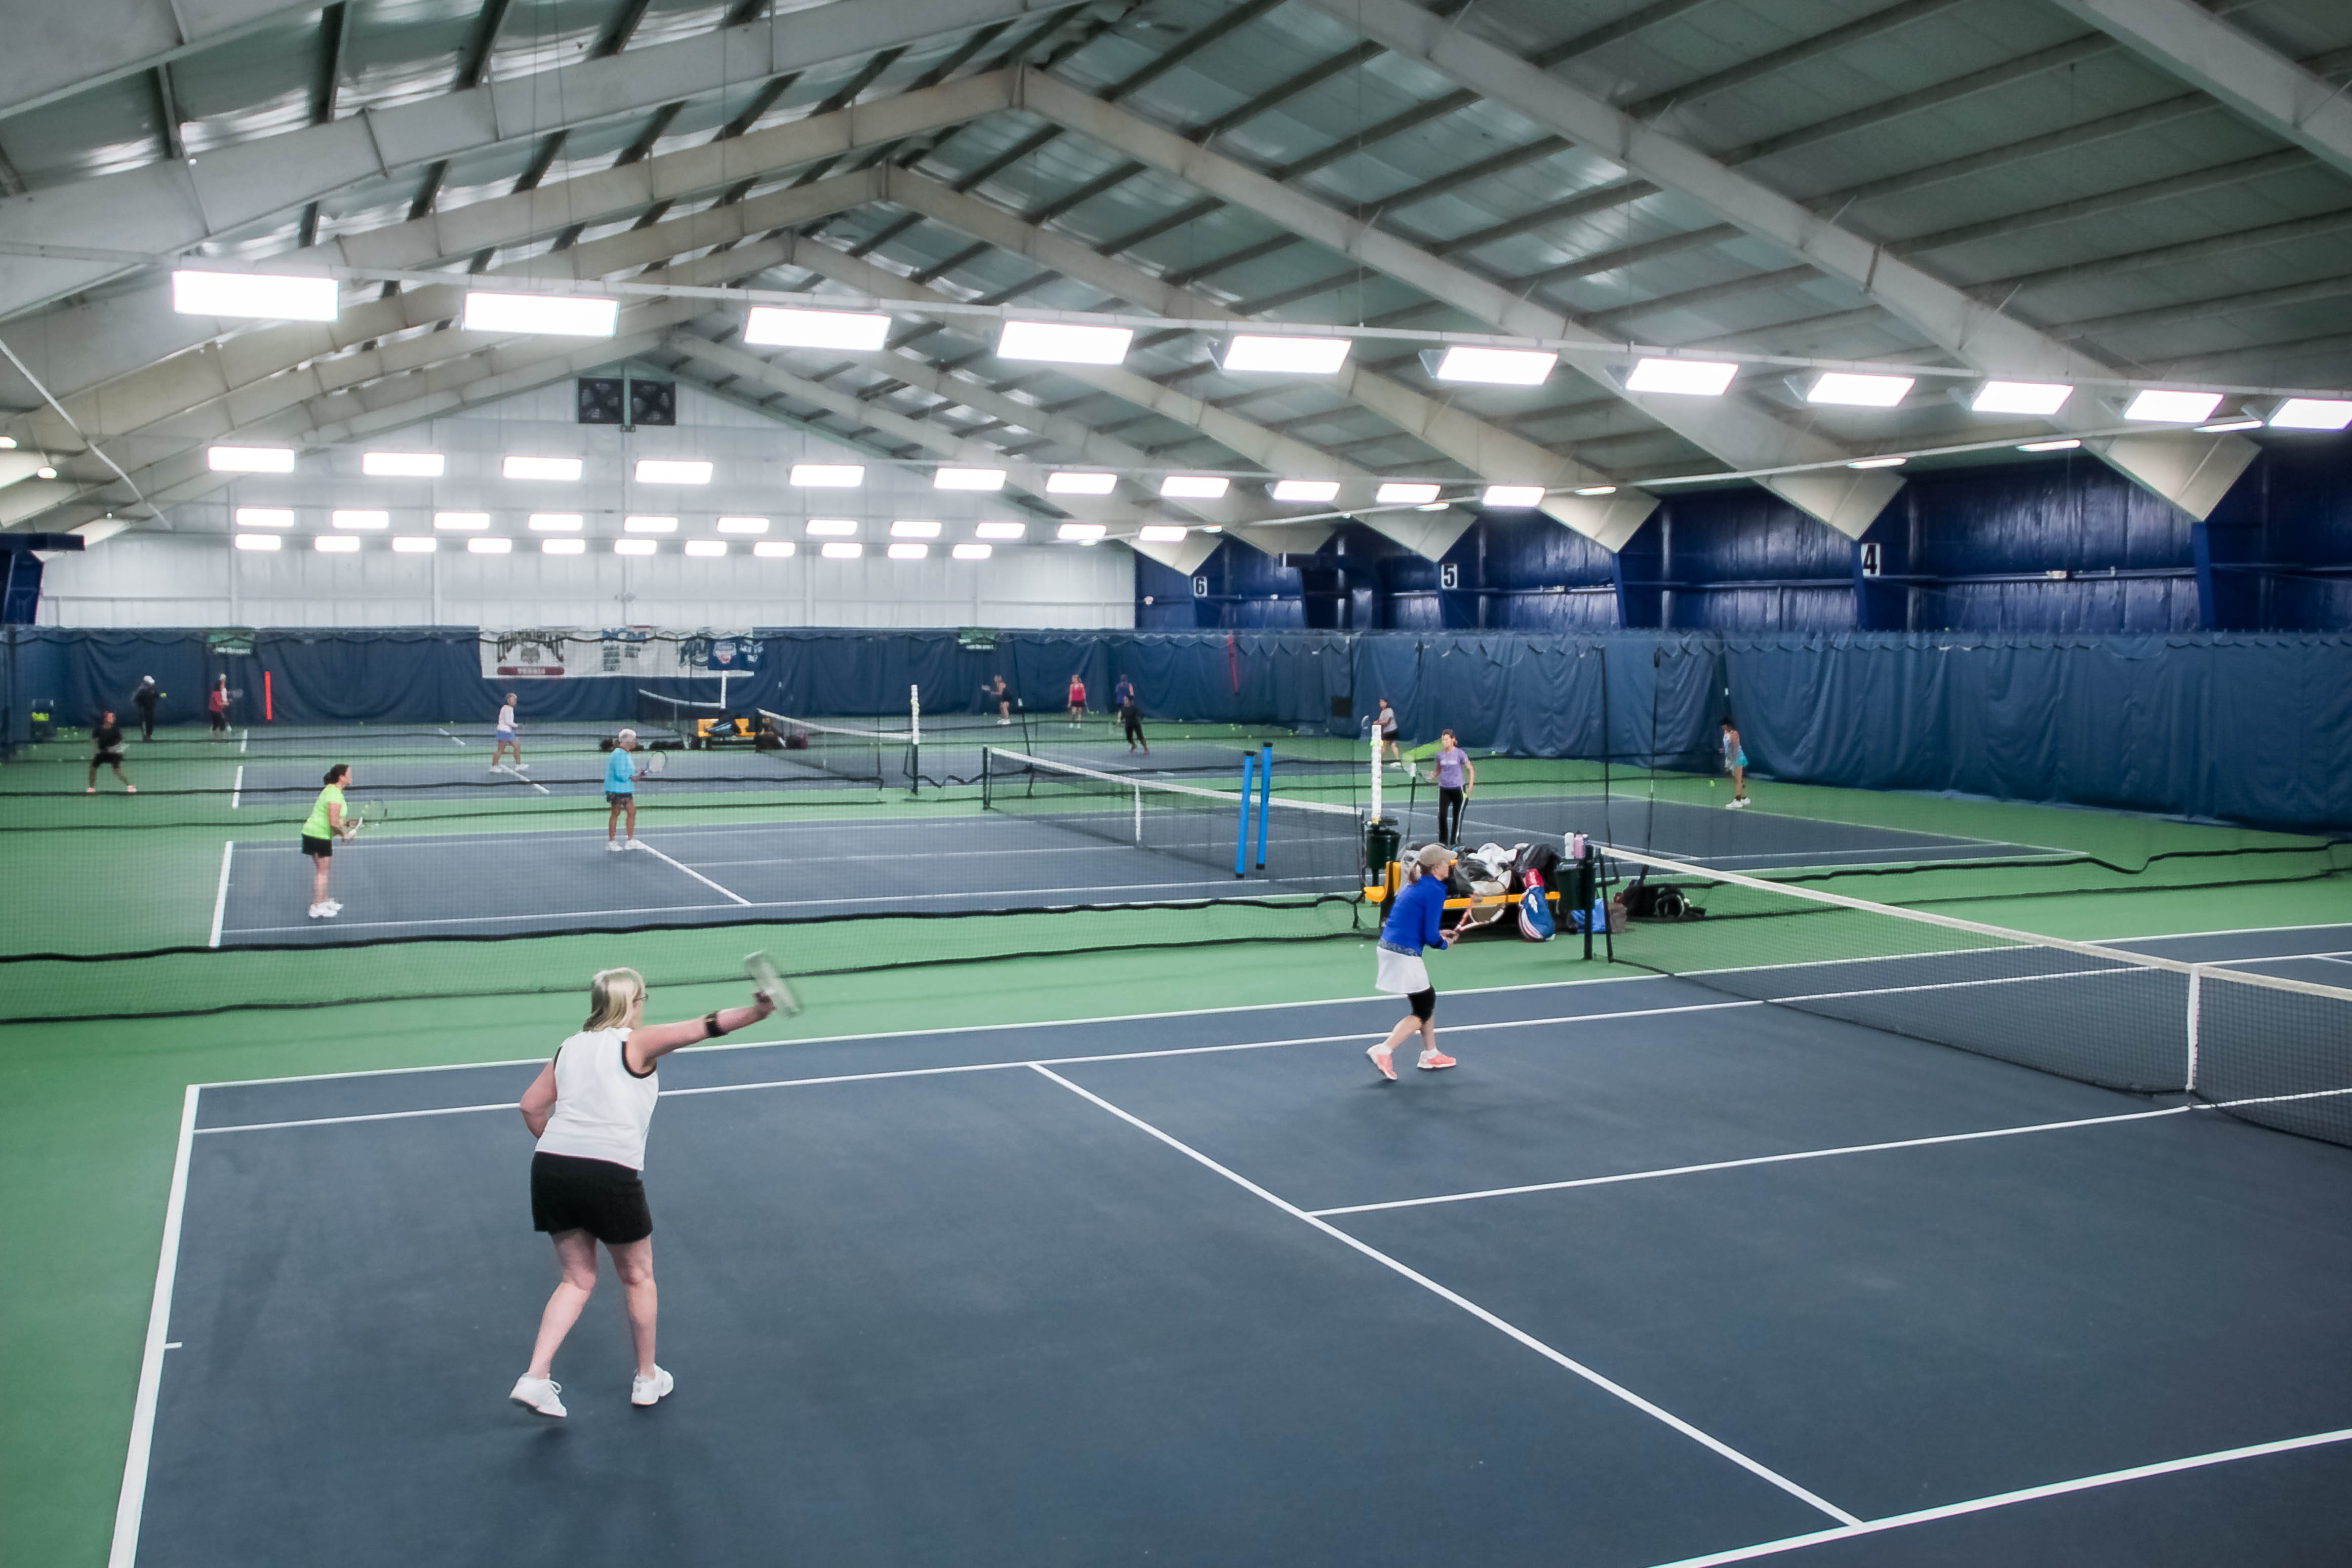 Indoor Tennis Courts CT Tennis Classes Leagues Teams Instruction